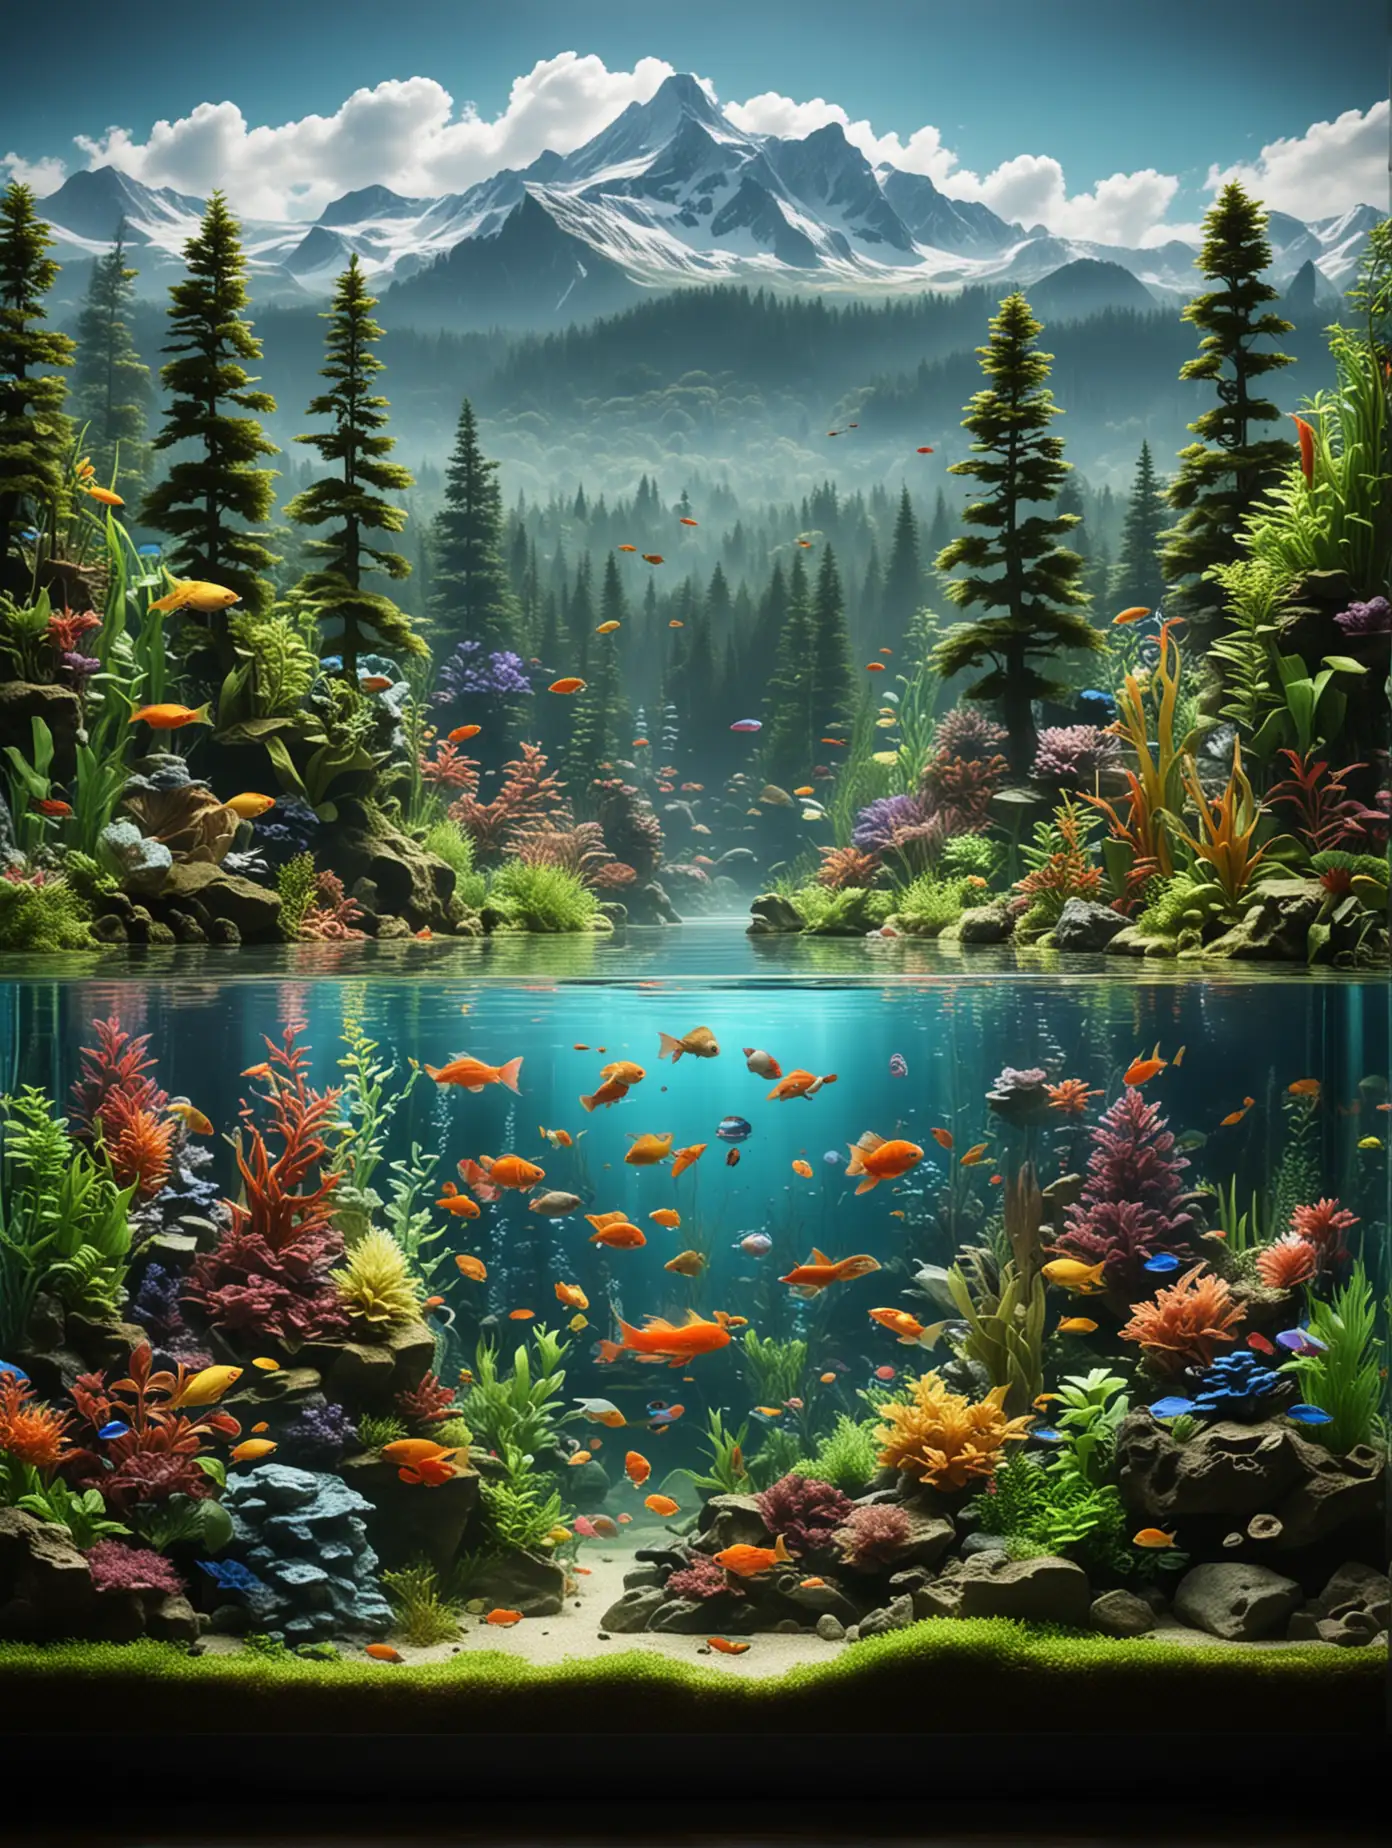 generate an image of an aquarium with various colorful fish, a forest, and mountains inside, the aquarium is a rectangular shape, below it is grassland